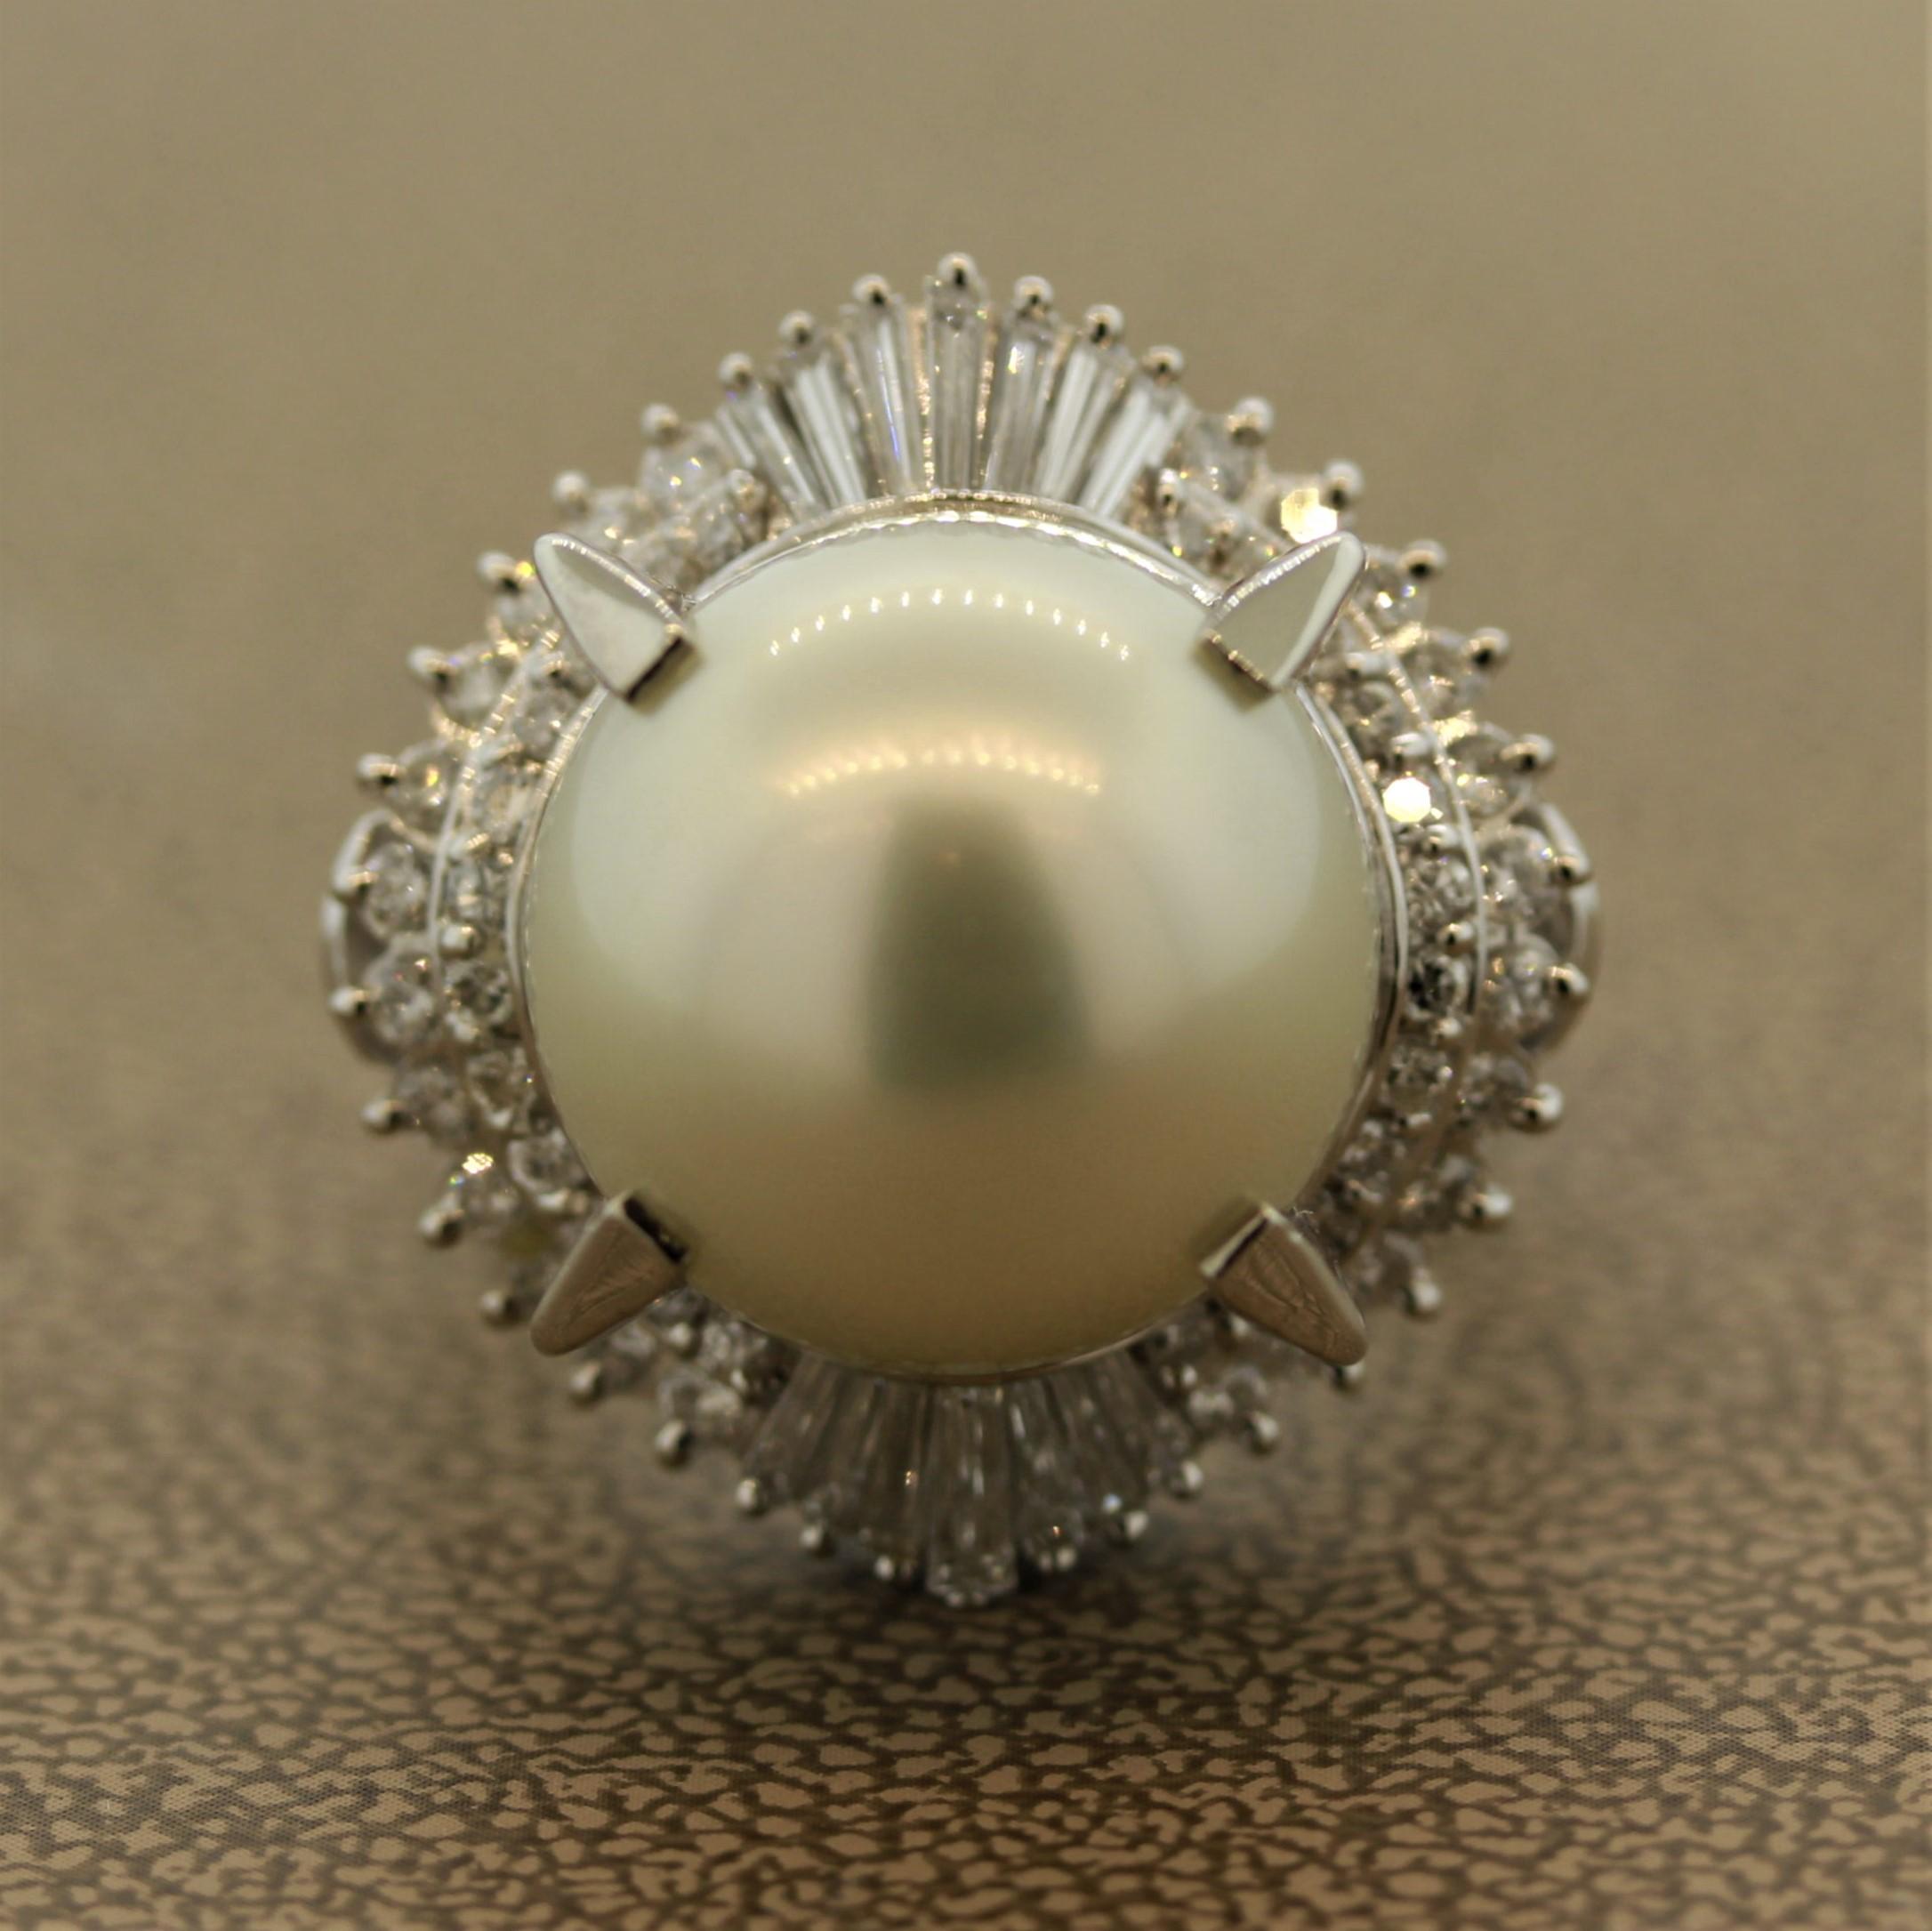 In buying your jewelry you can never go wrong if you go big.

This ring features a stunning 14.4mm South Sea pearl with an amazing luster which is encircled by 1.10 Carats of round and baguette cut diamonds.

The ring is made of platinum.

Ring